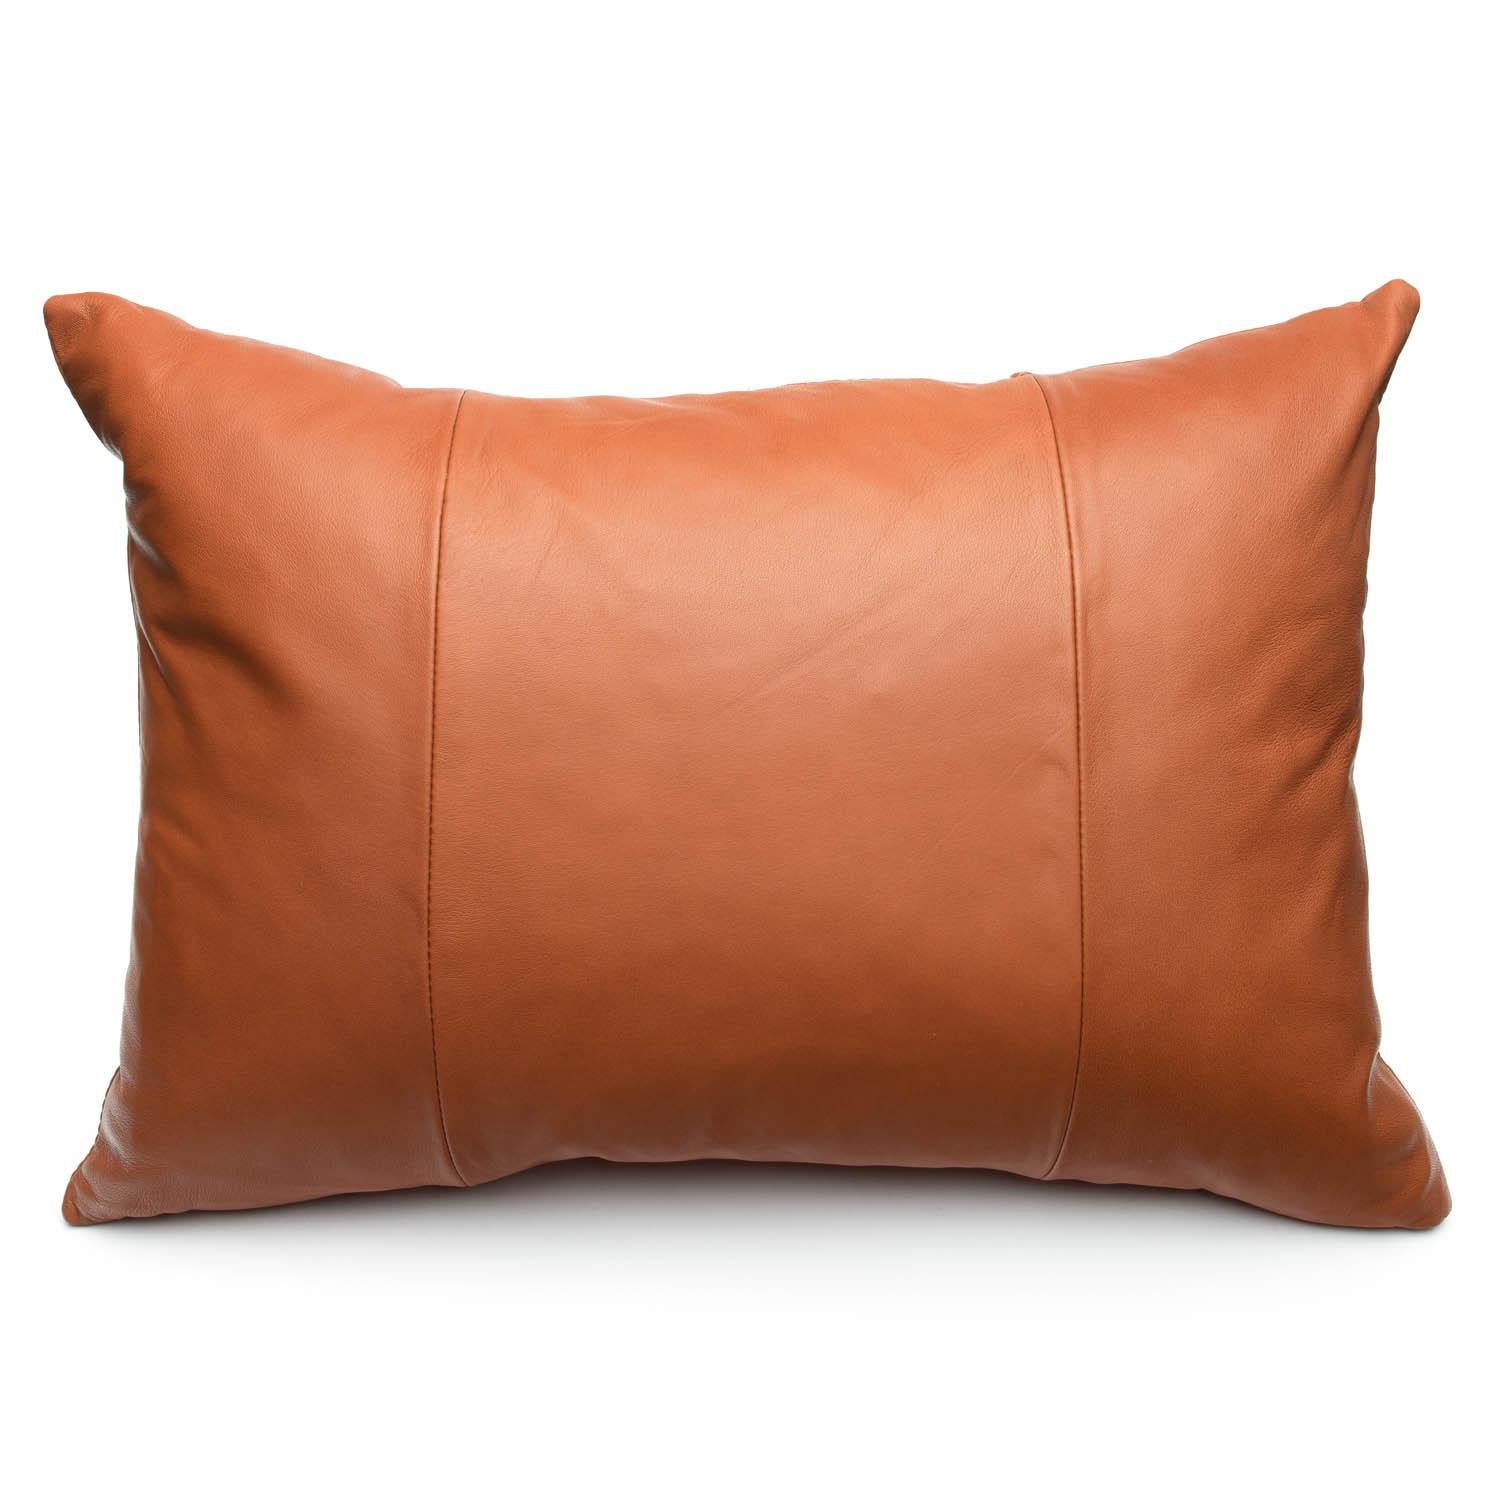 Create an instant refreshing designer look with this striking Tannish brown leather pillow. Intricately crafted using honored time traditions and leather craftsmanship paired back with eclectic contemporary design.
Designed by Australian artisan,